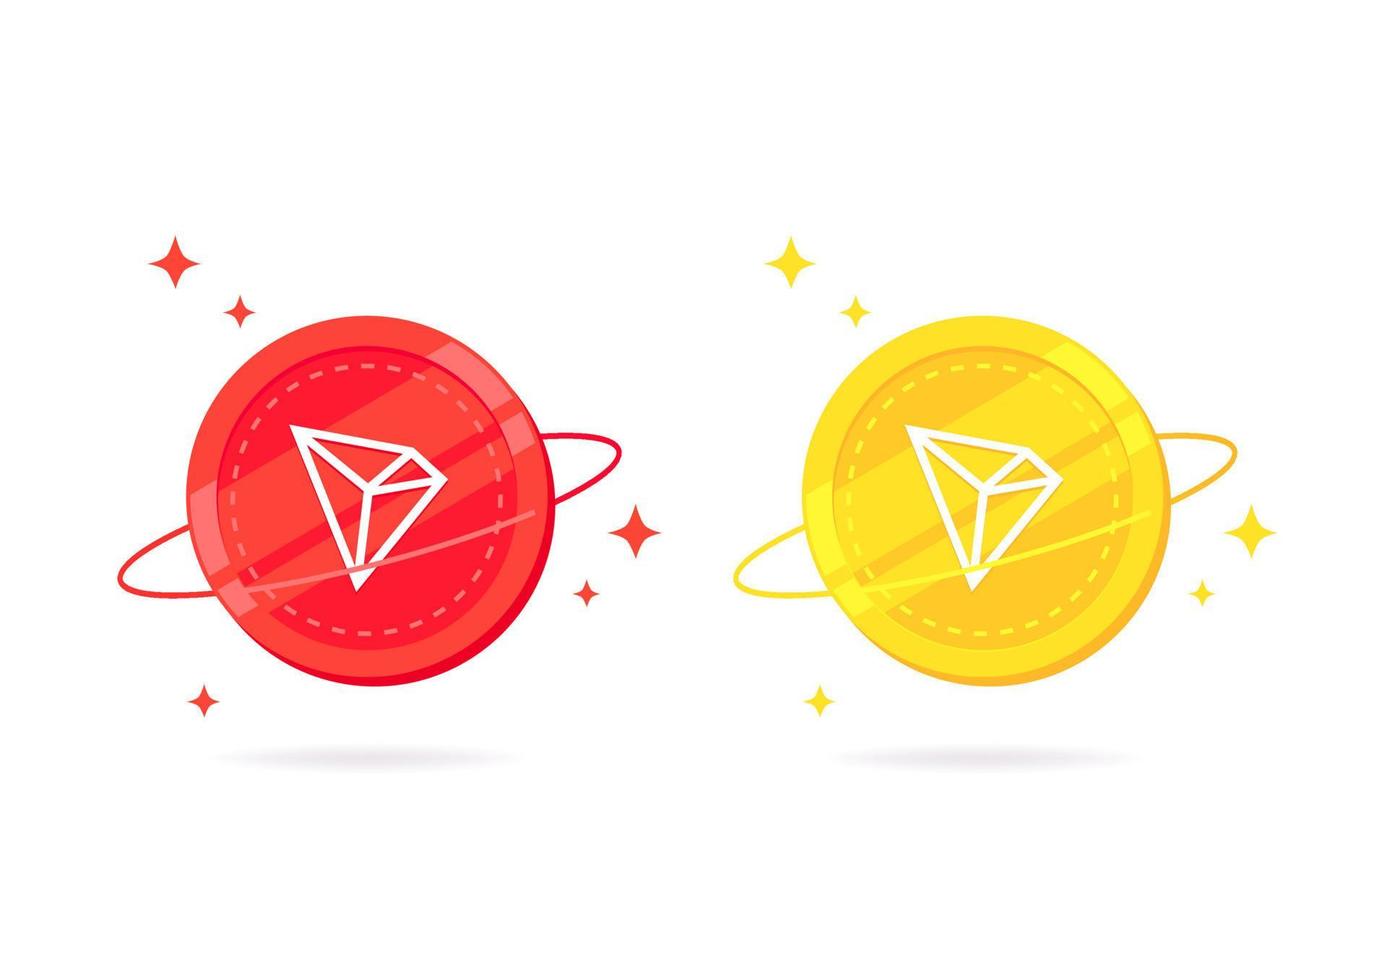 TRON TRX coin flat icon isolated on white background. vector